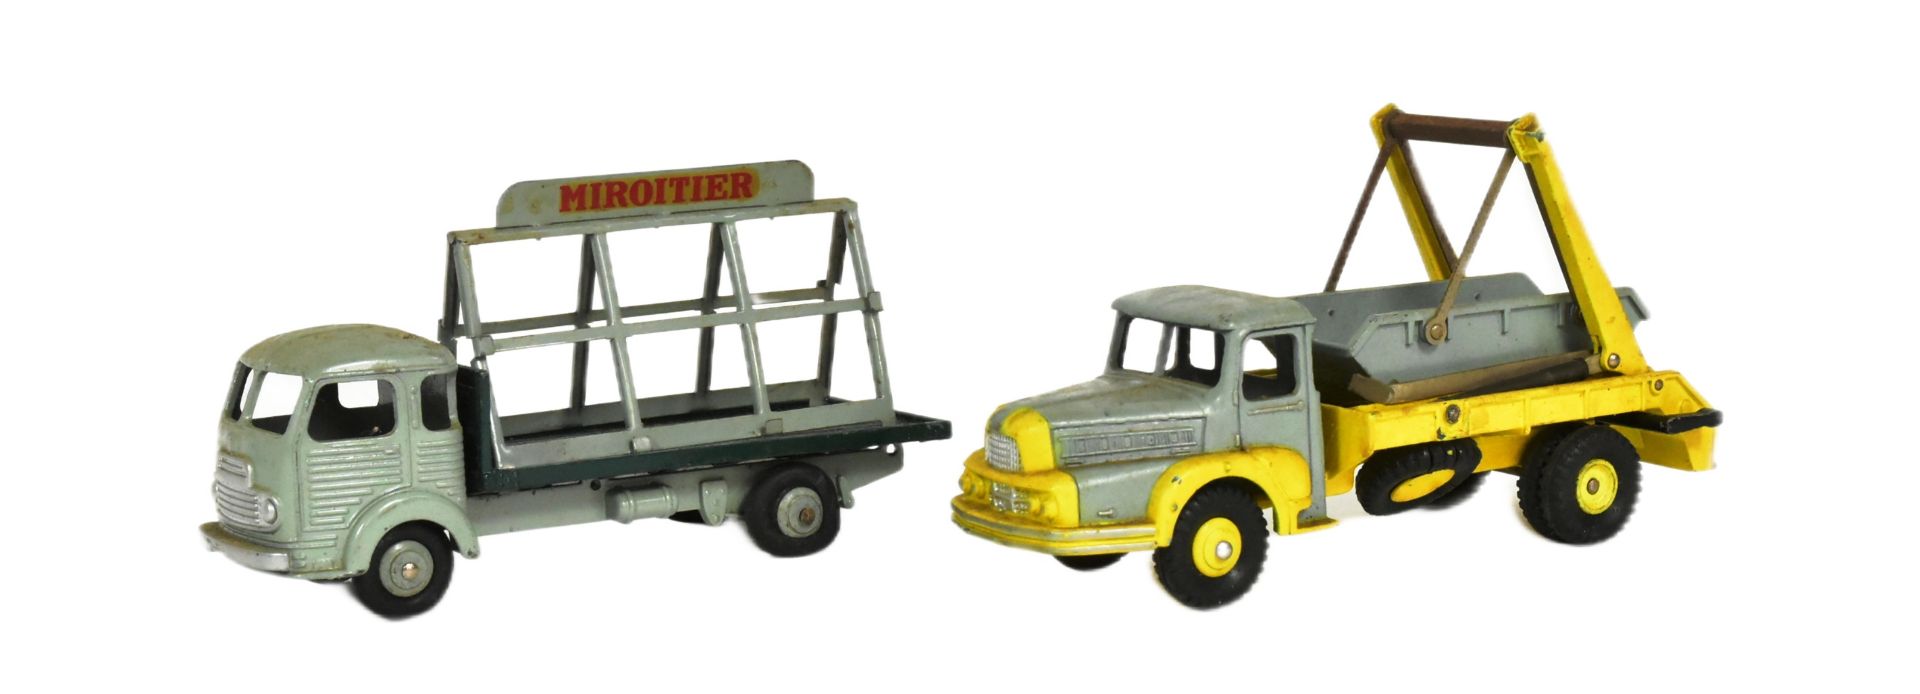 DIECAST - FRENCH DINKY TOYS - SIMCA CARGO & MULTI-BUCKET TRUCK